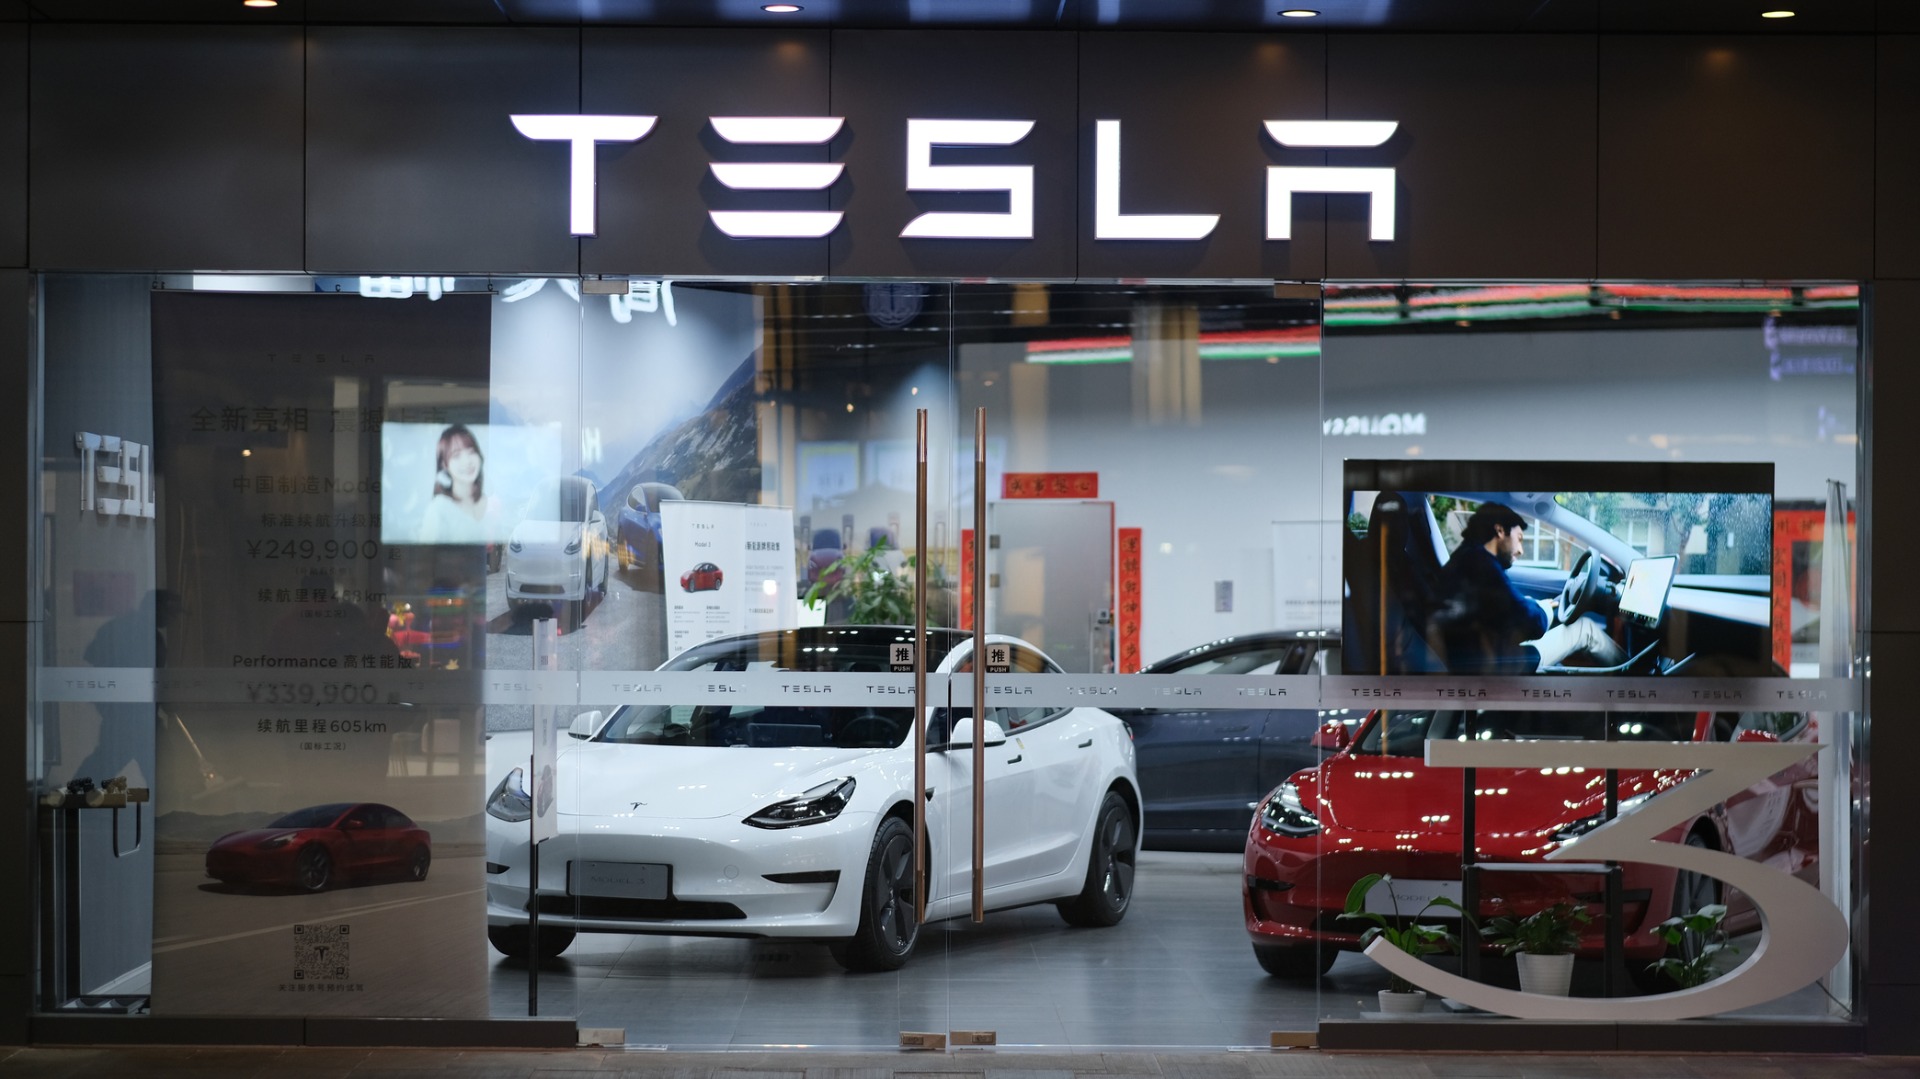 Tesla Electric helps you save money on monthly power bills